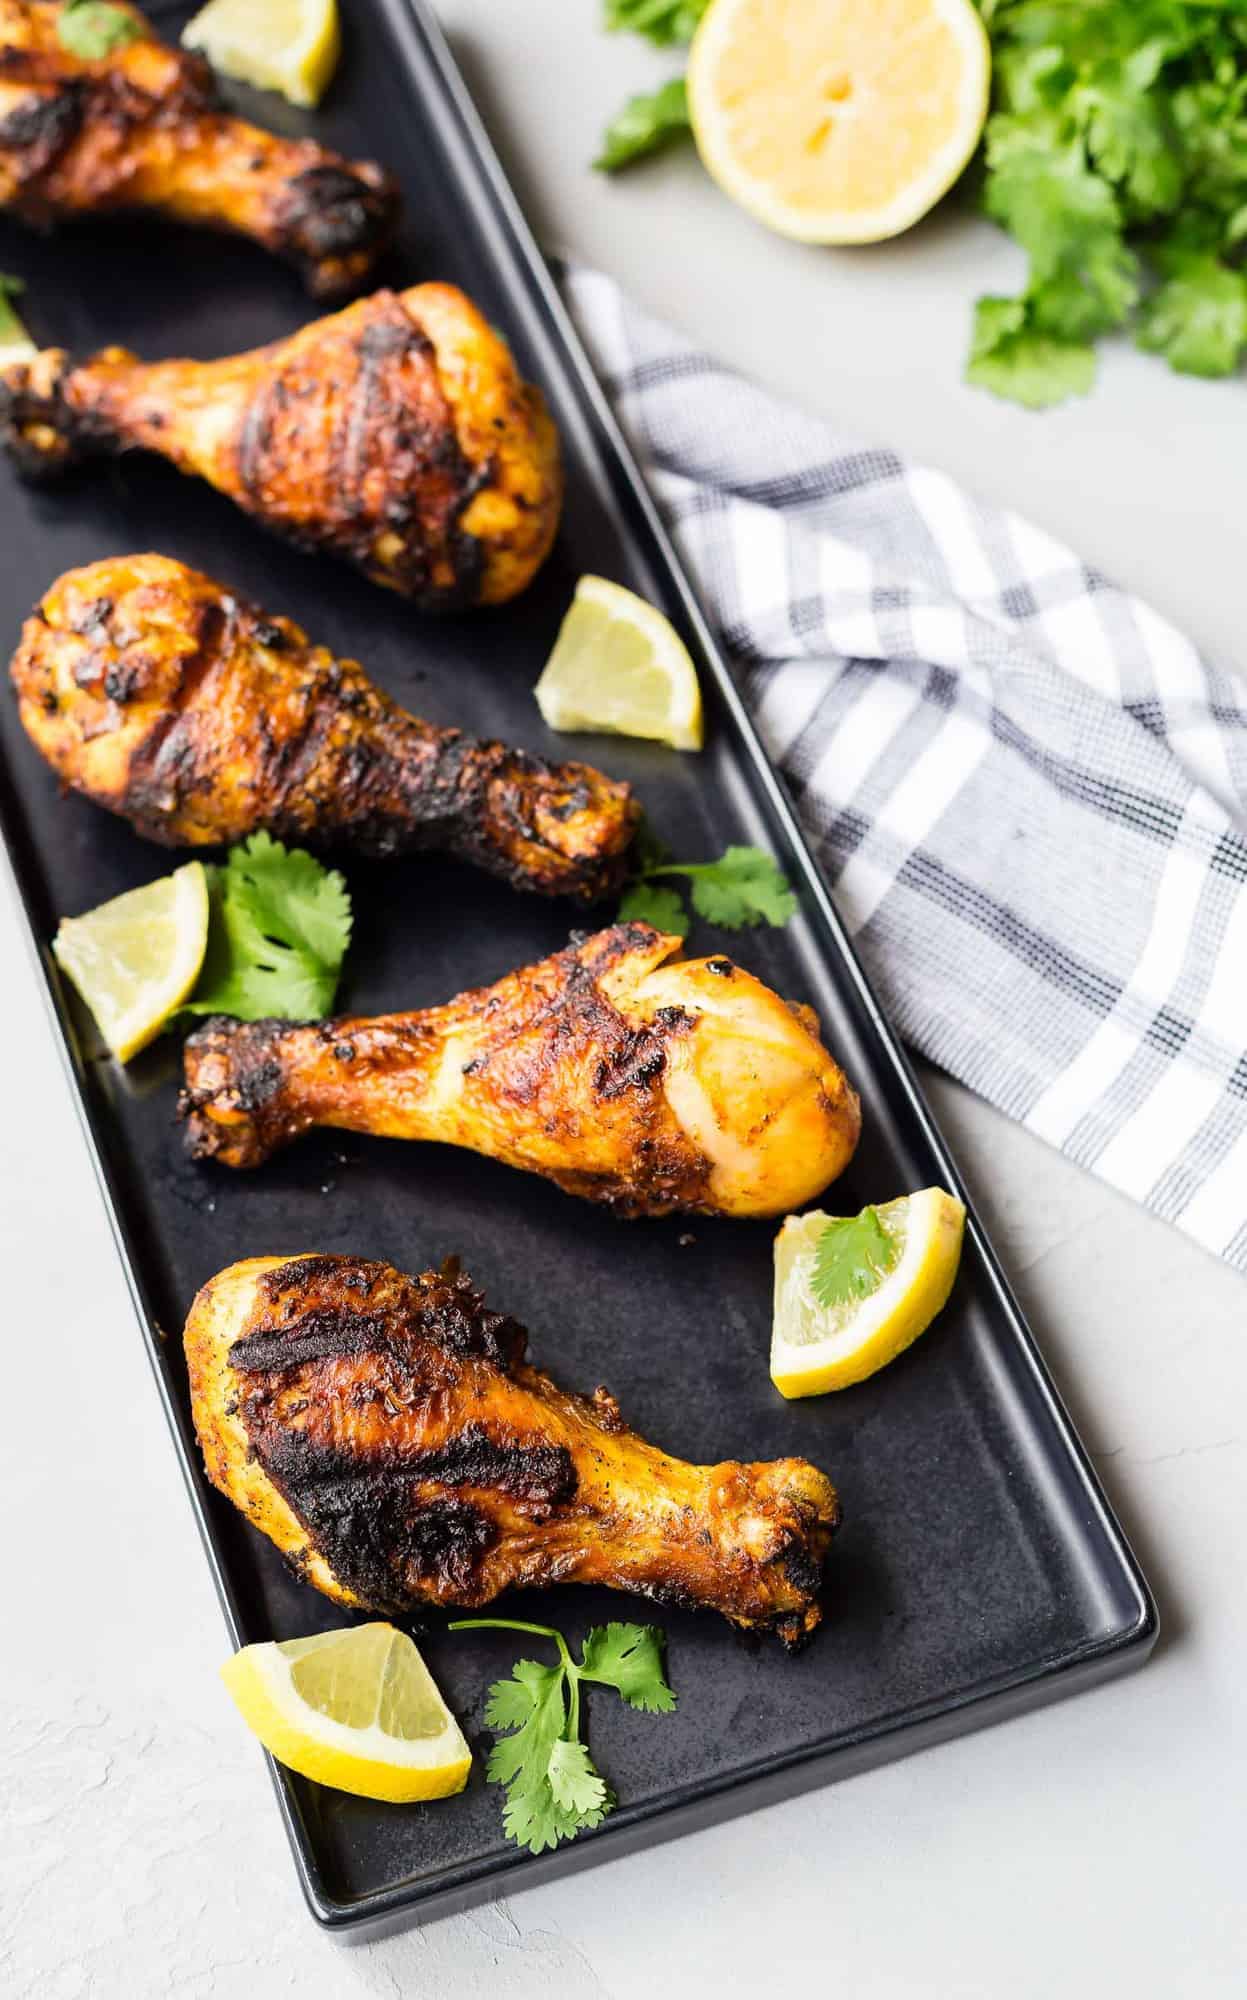 Overhead view of rectangular black platter with grilled chicken drumsticks on it.